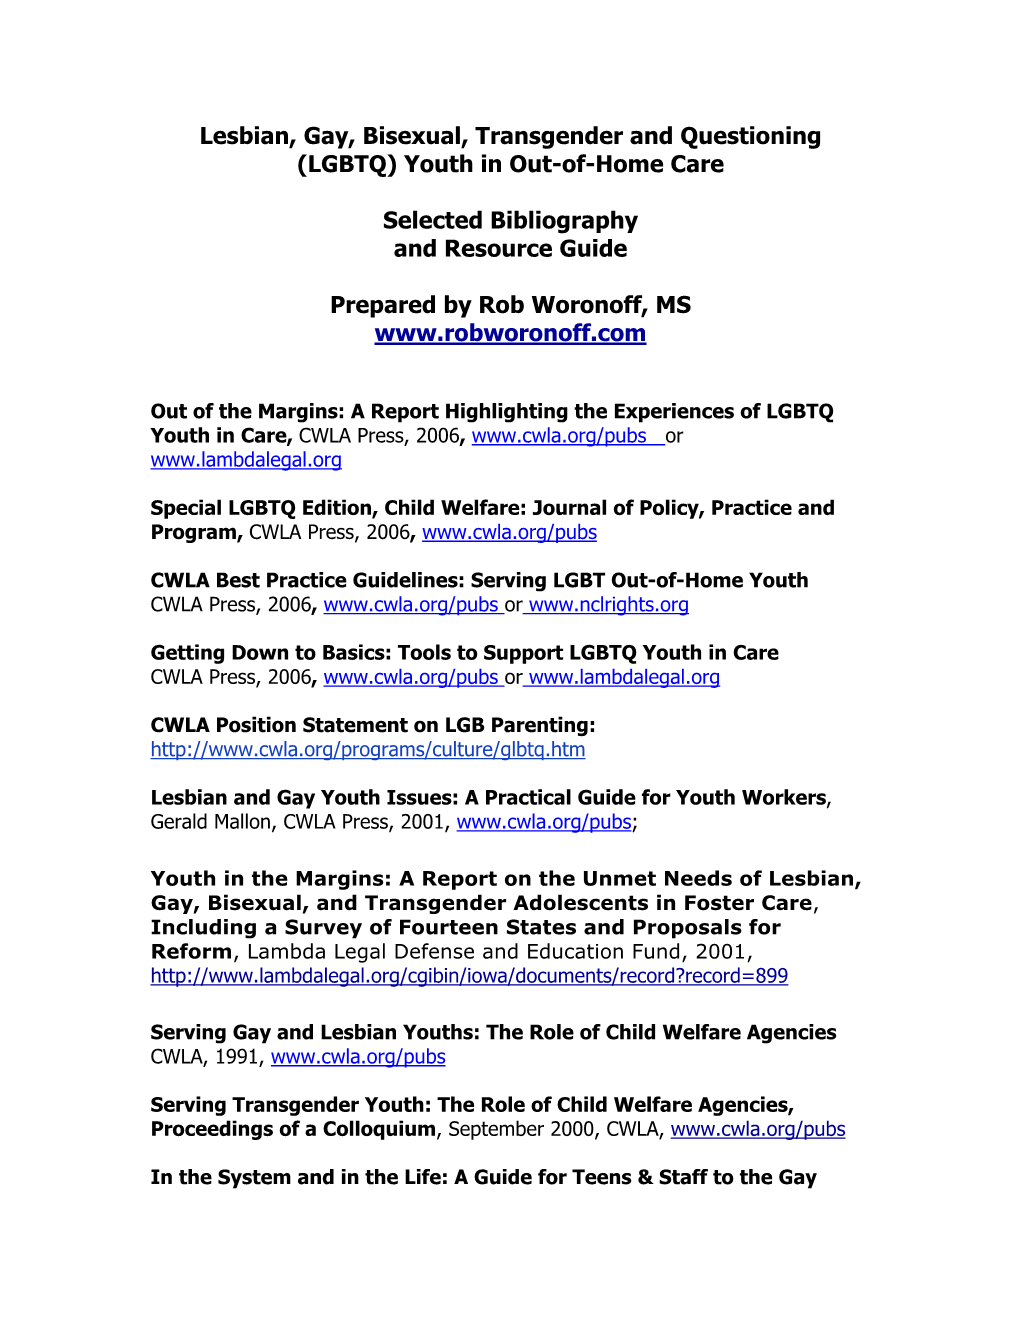 Lesbian, Gay, Bisexual, Transgender and Questioning (LGBTQ) Youth in Out-Of-Home Care